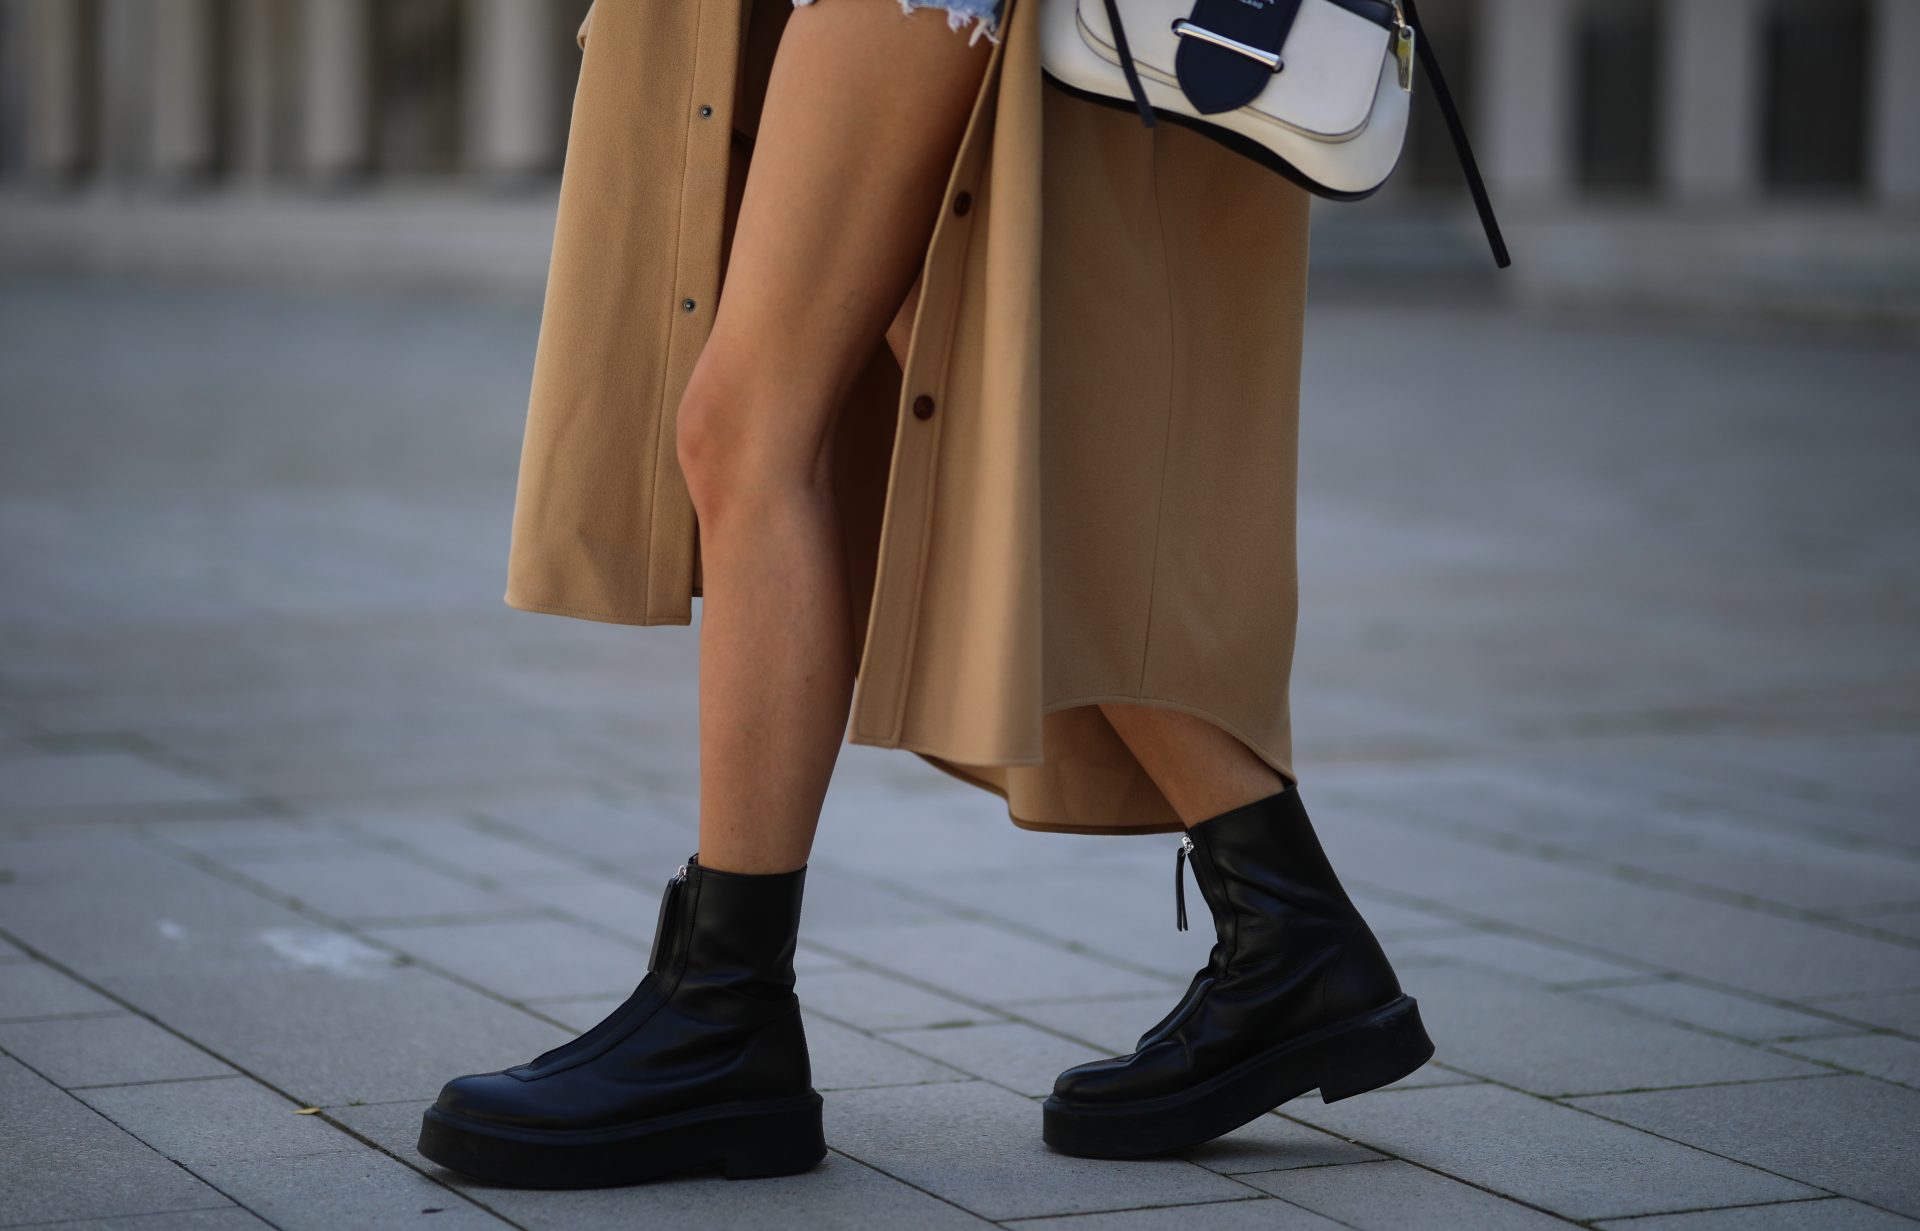 Boot trends 2021: zip-up chunky ankle boots inspired by The Row